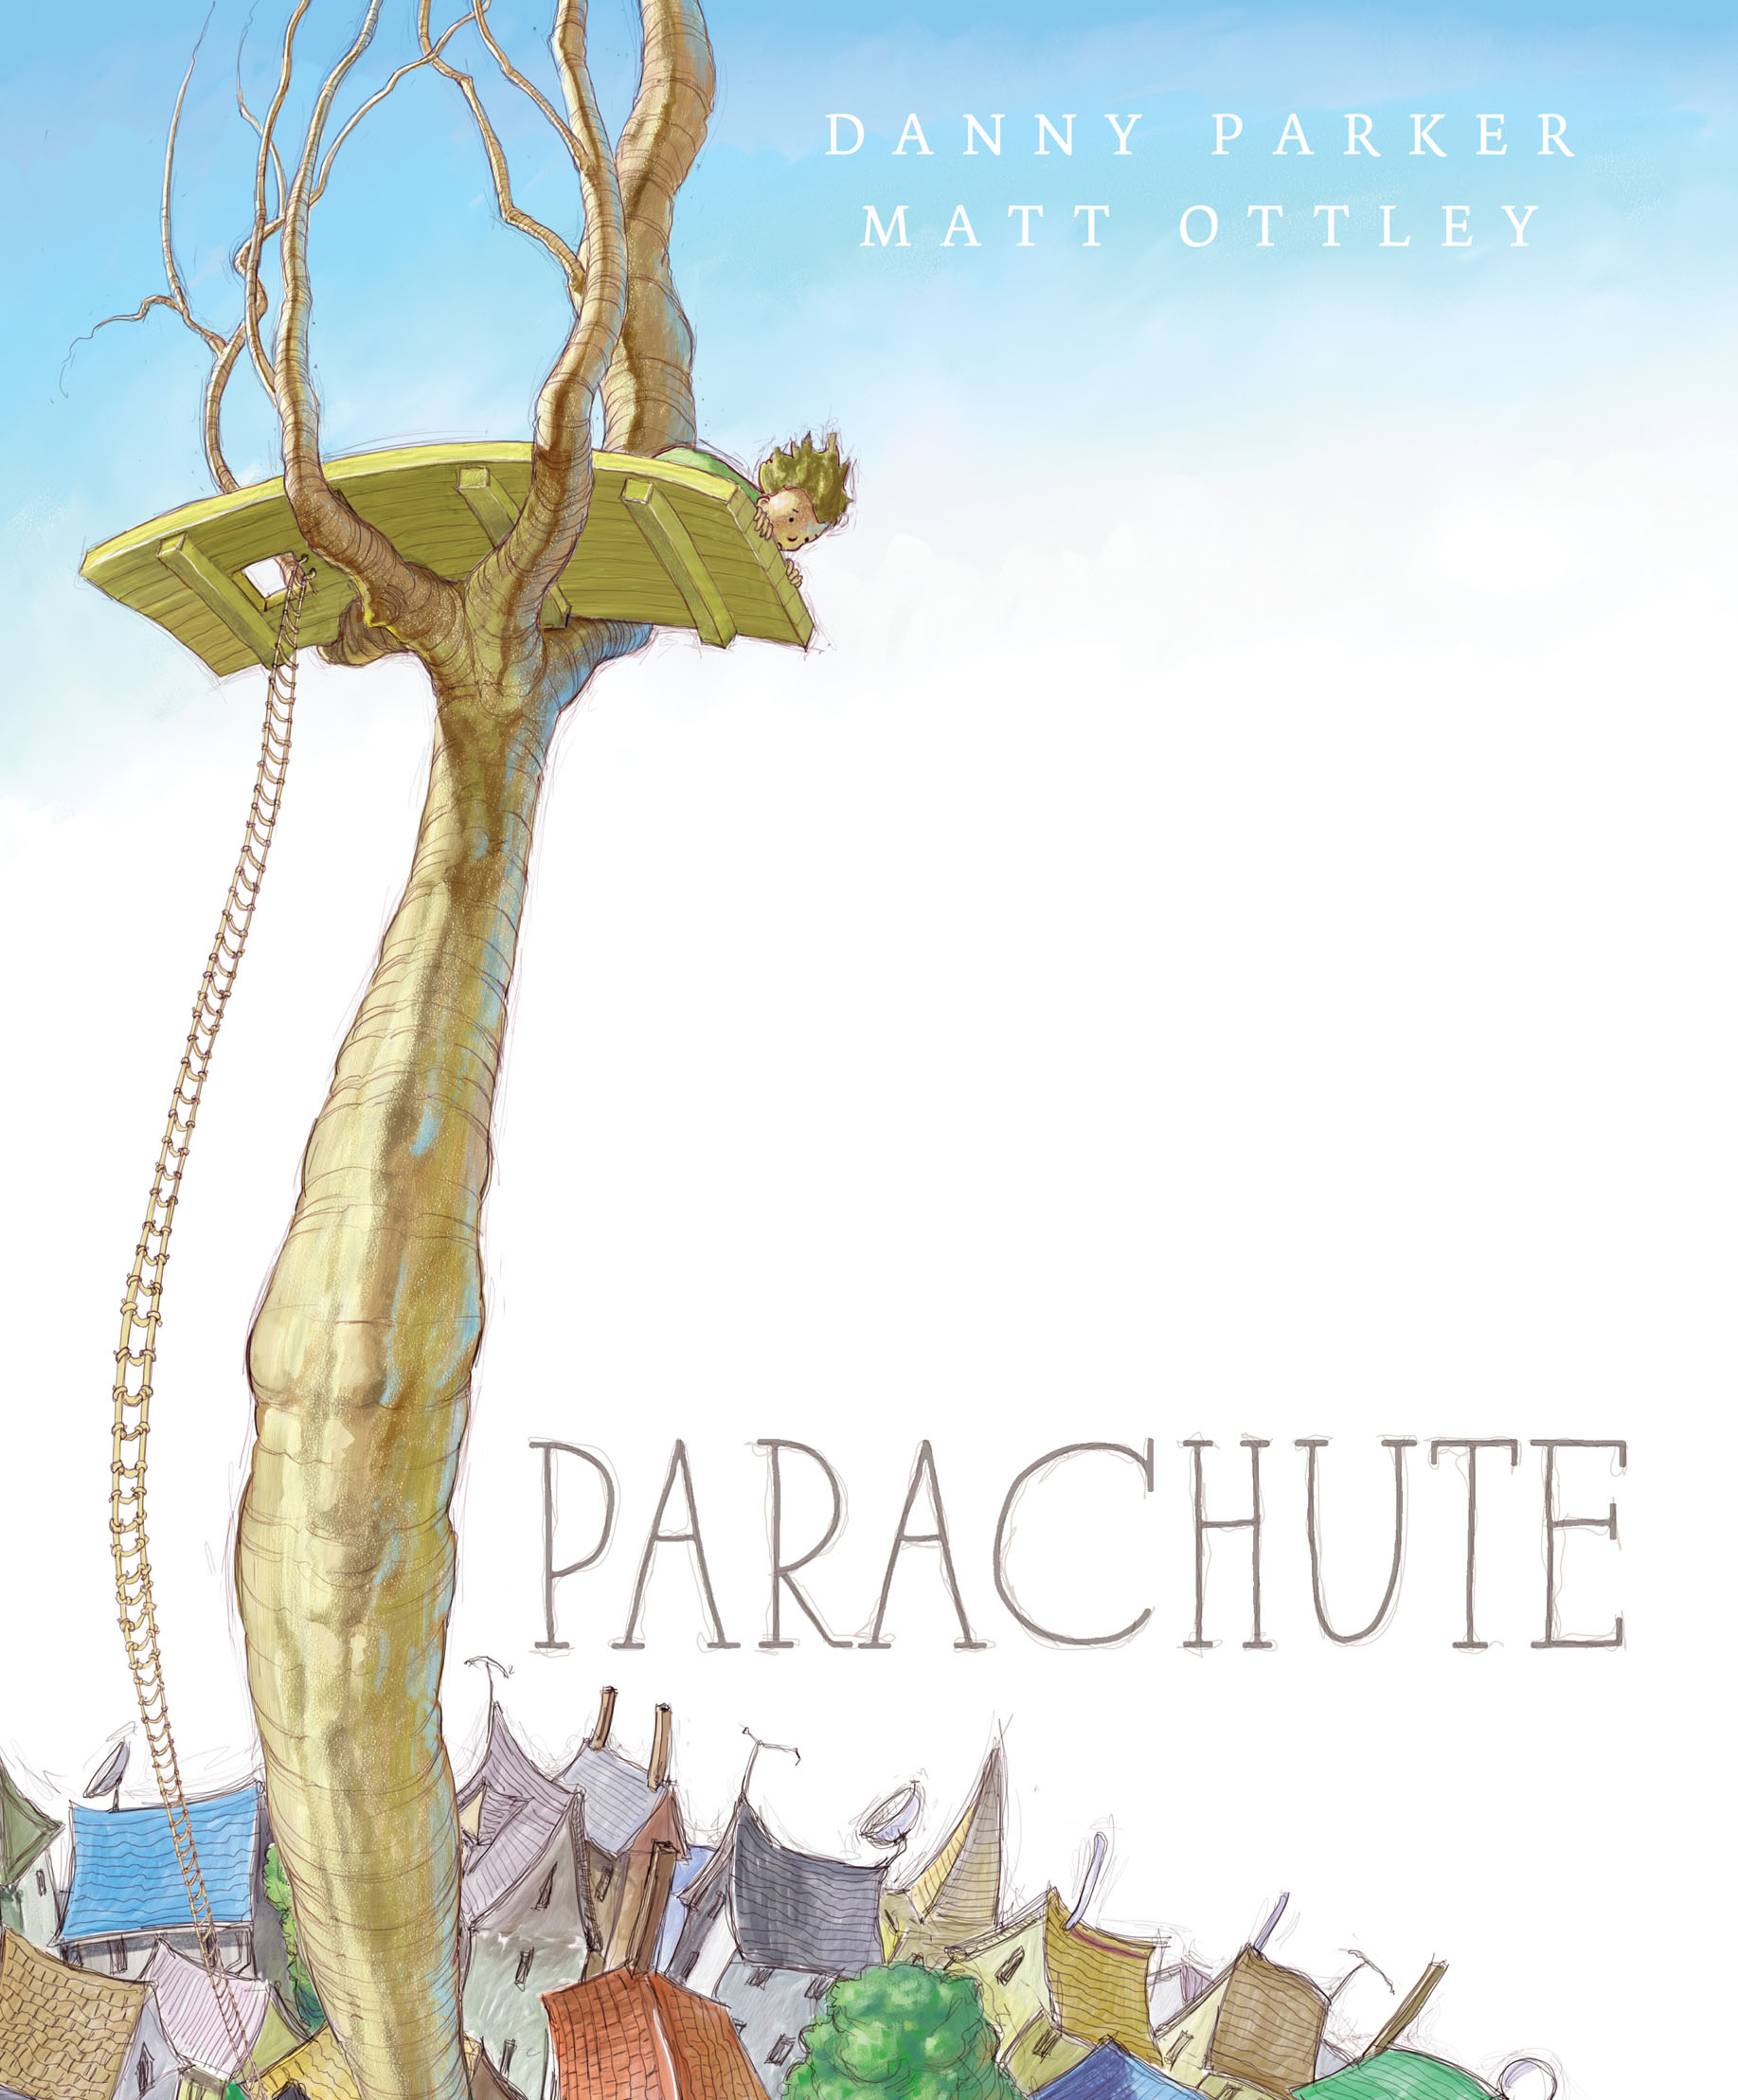 Children's book cover for Parachute by Matt Ottley and Danny Parker